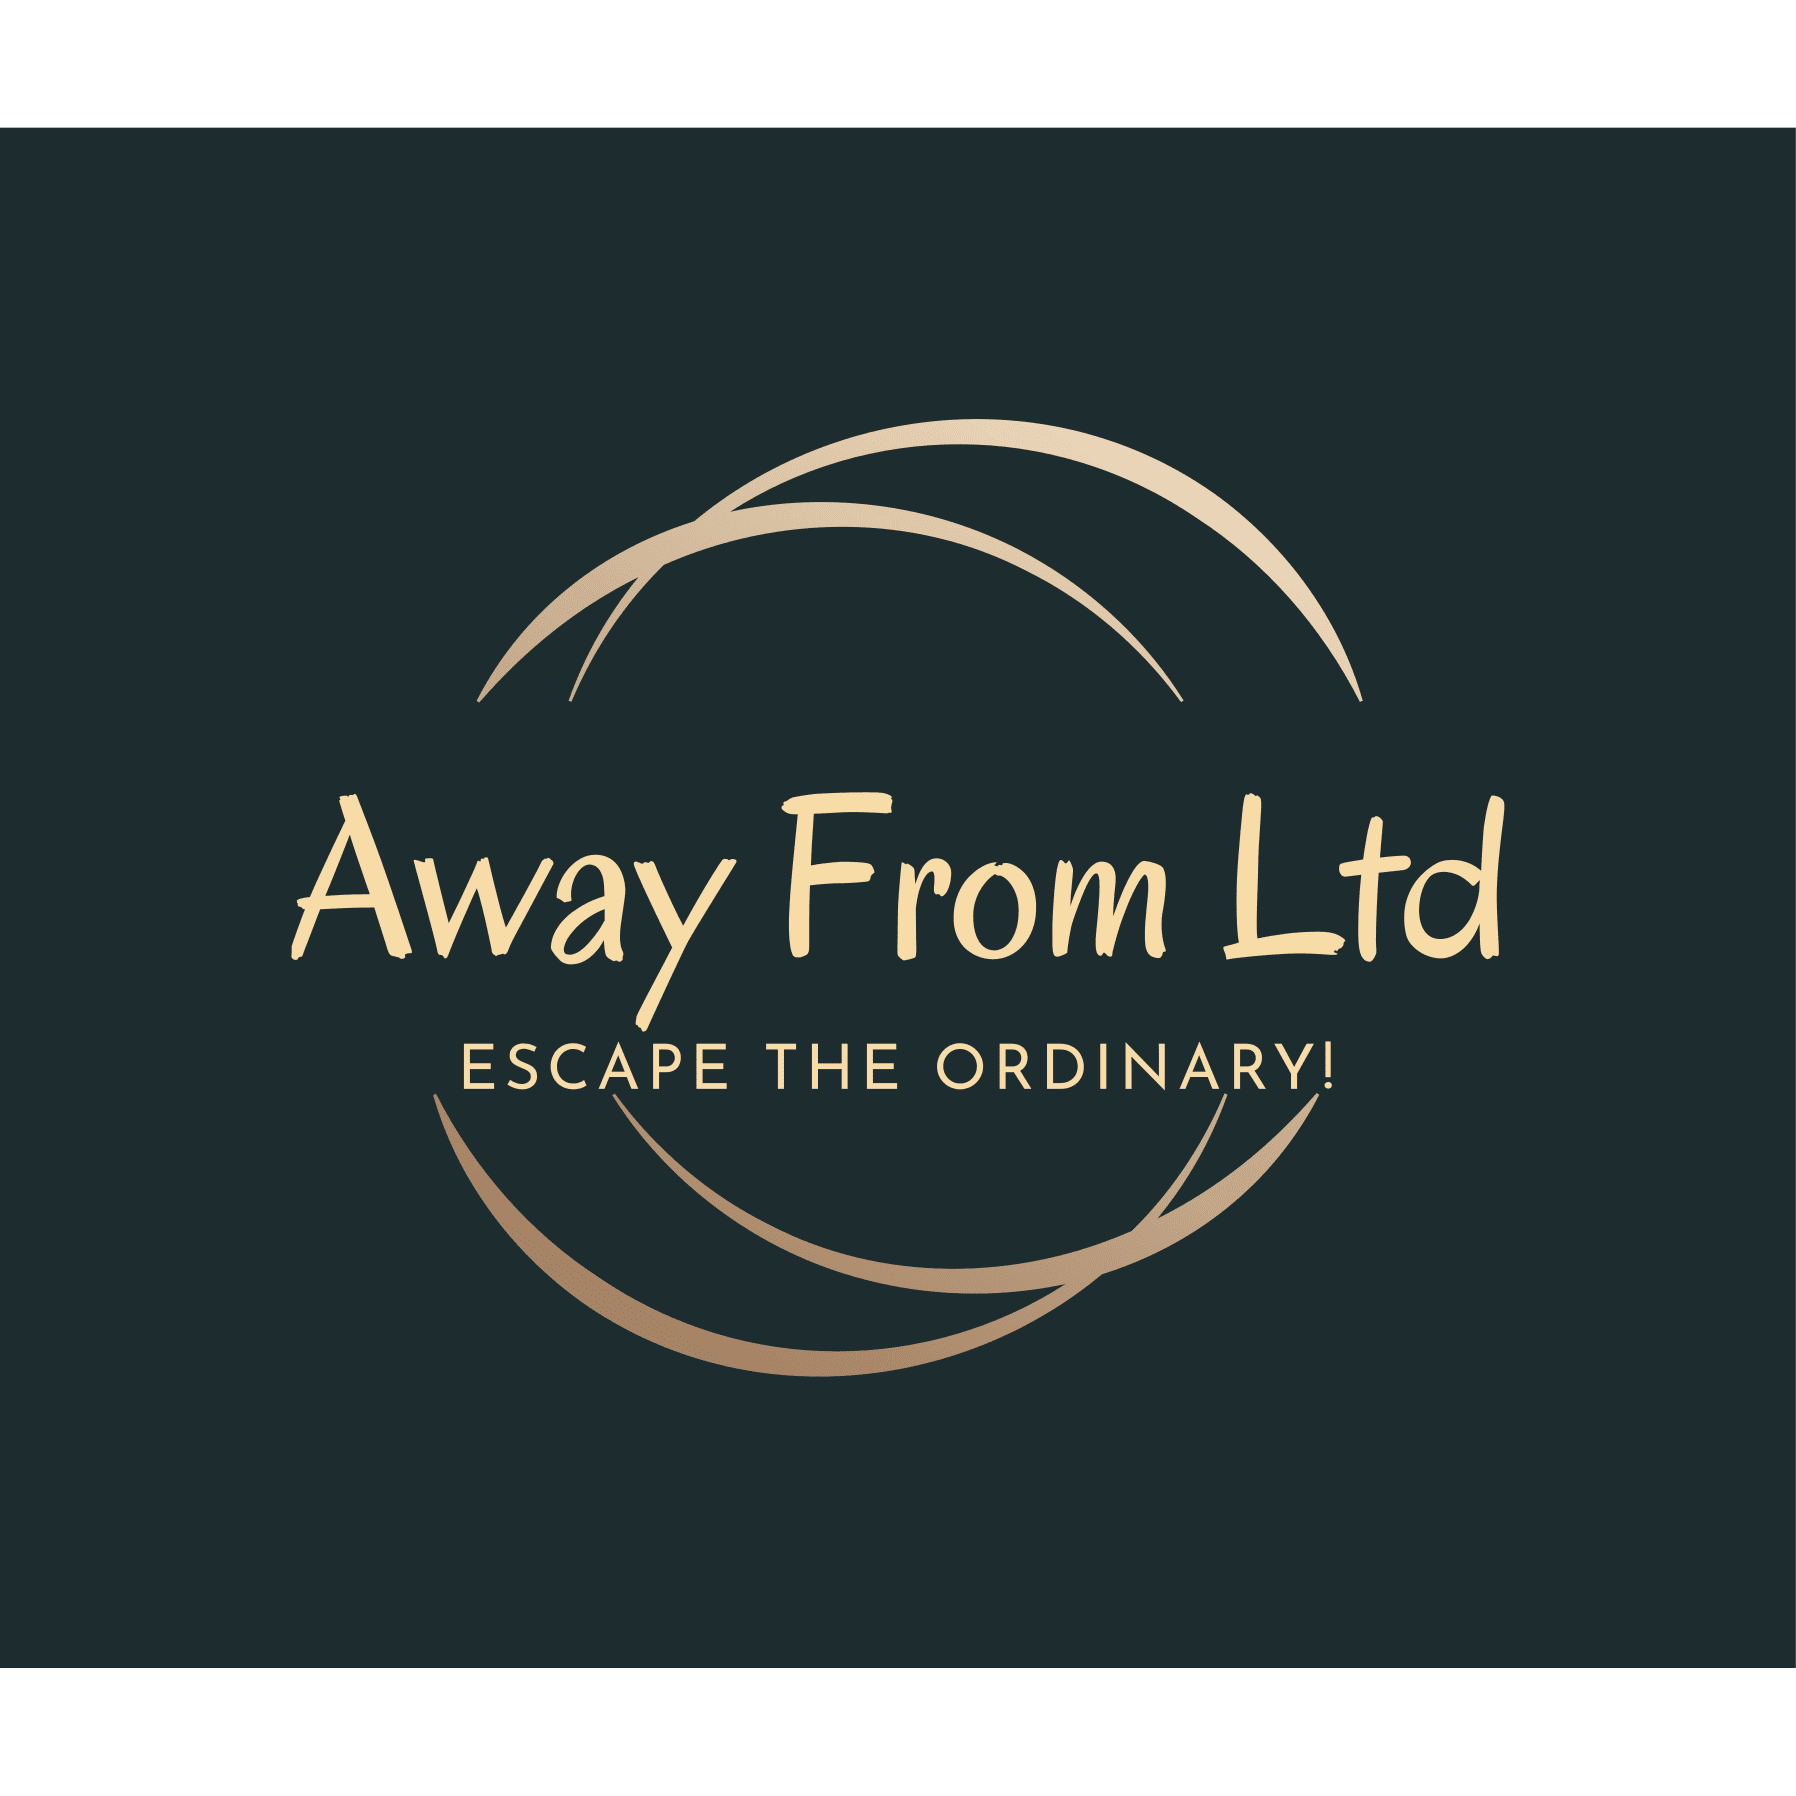 Away From Ltd - Newton-Le-Willows, Merseyside WA12 9UY - 07532 299155 | ShowMeLocal.com